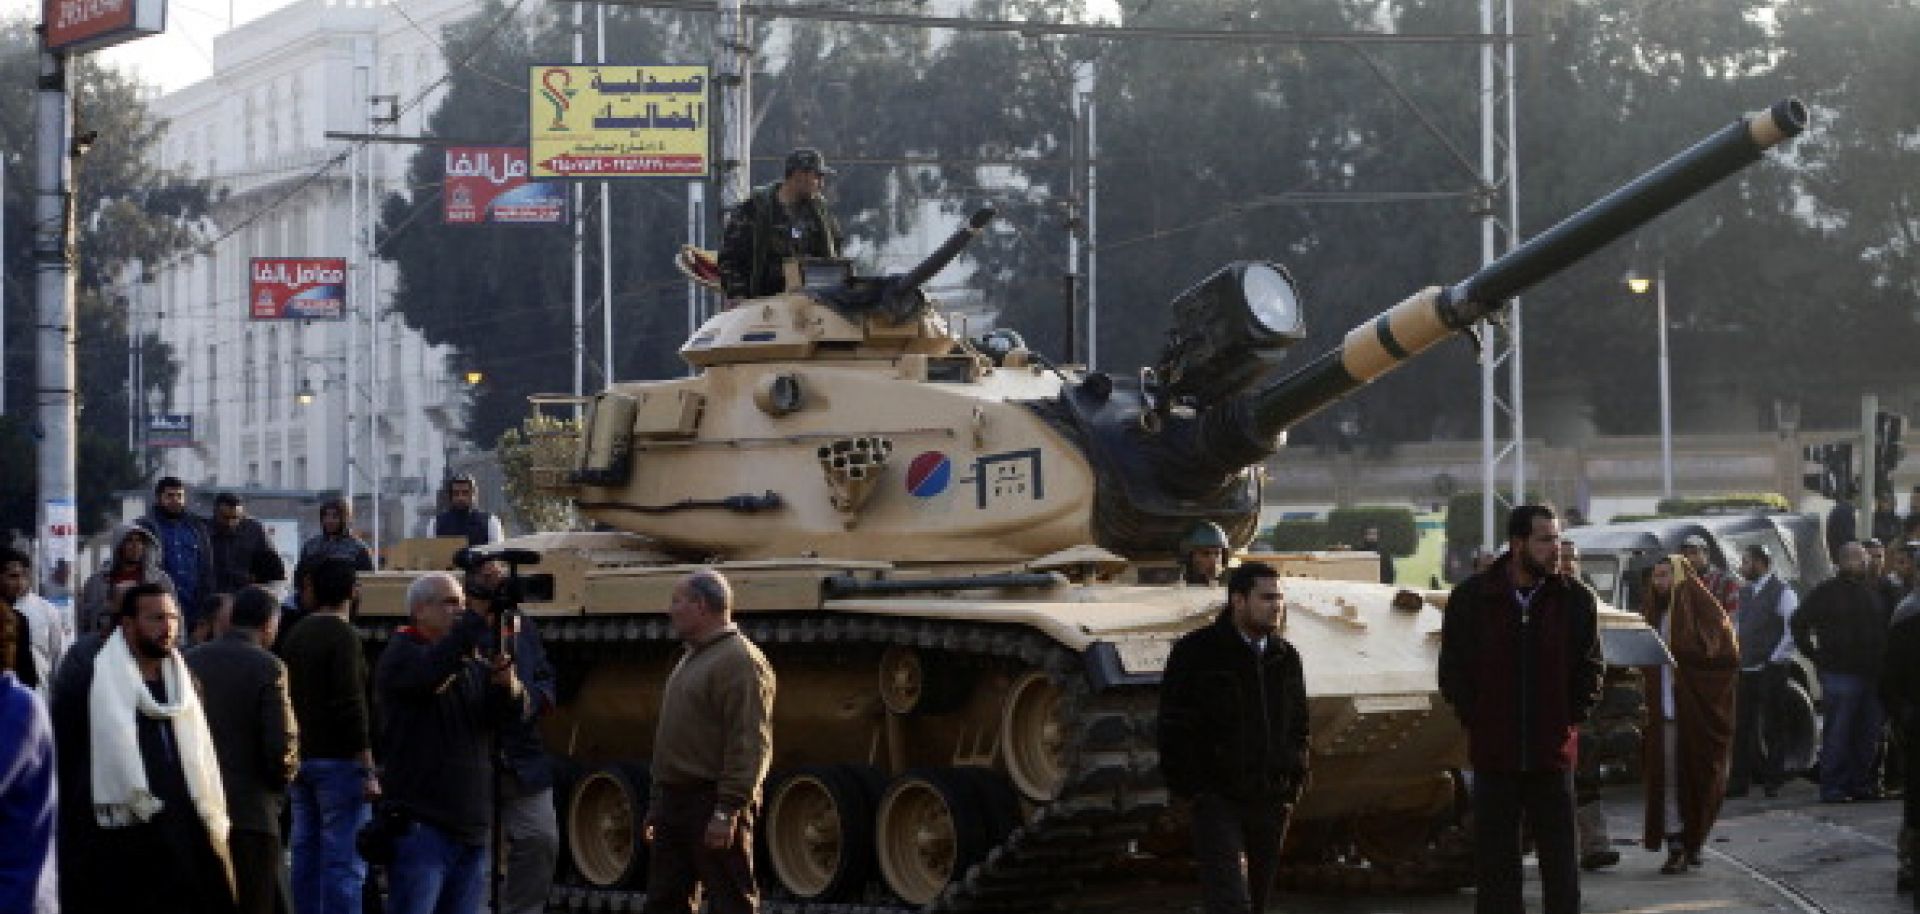 In Egypt, the Military's Power Endures